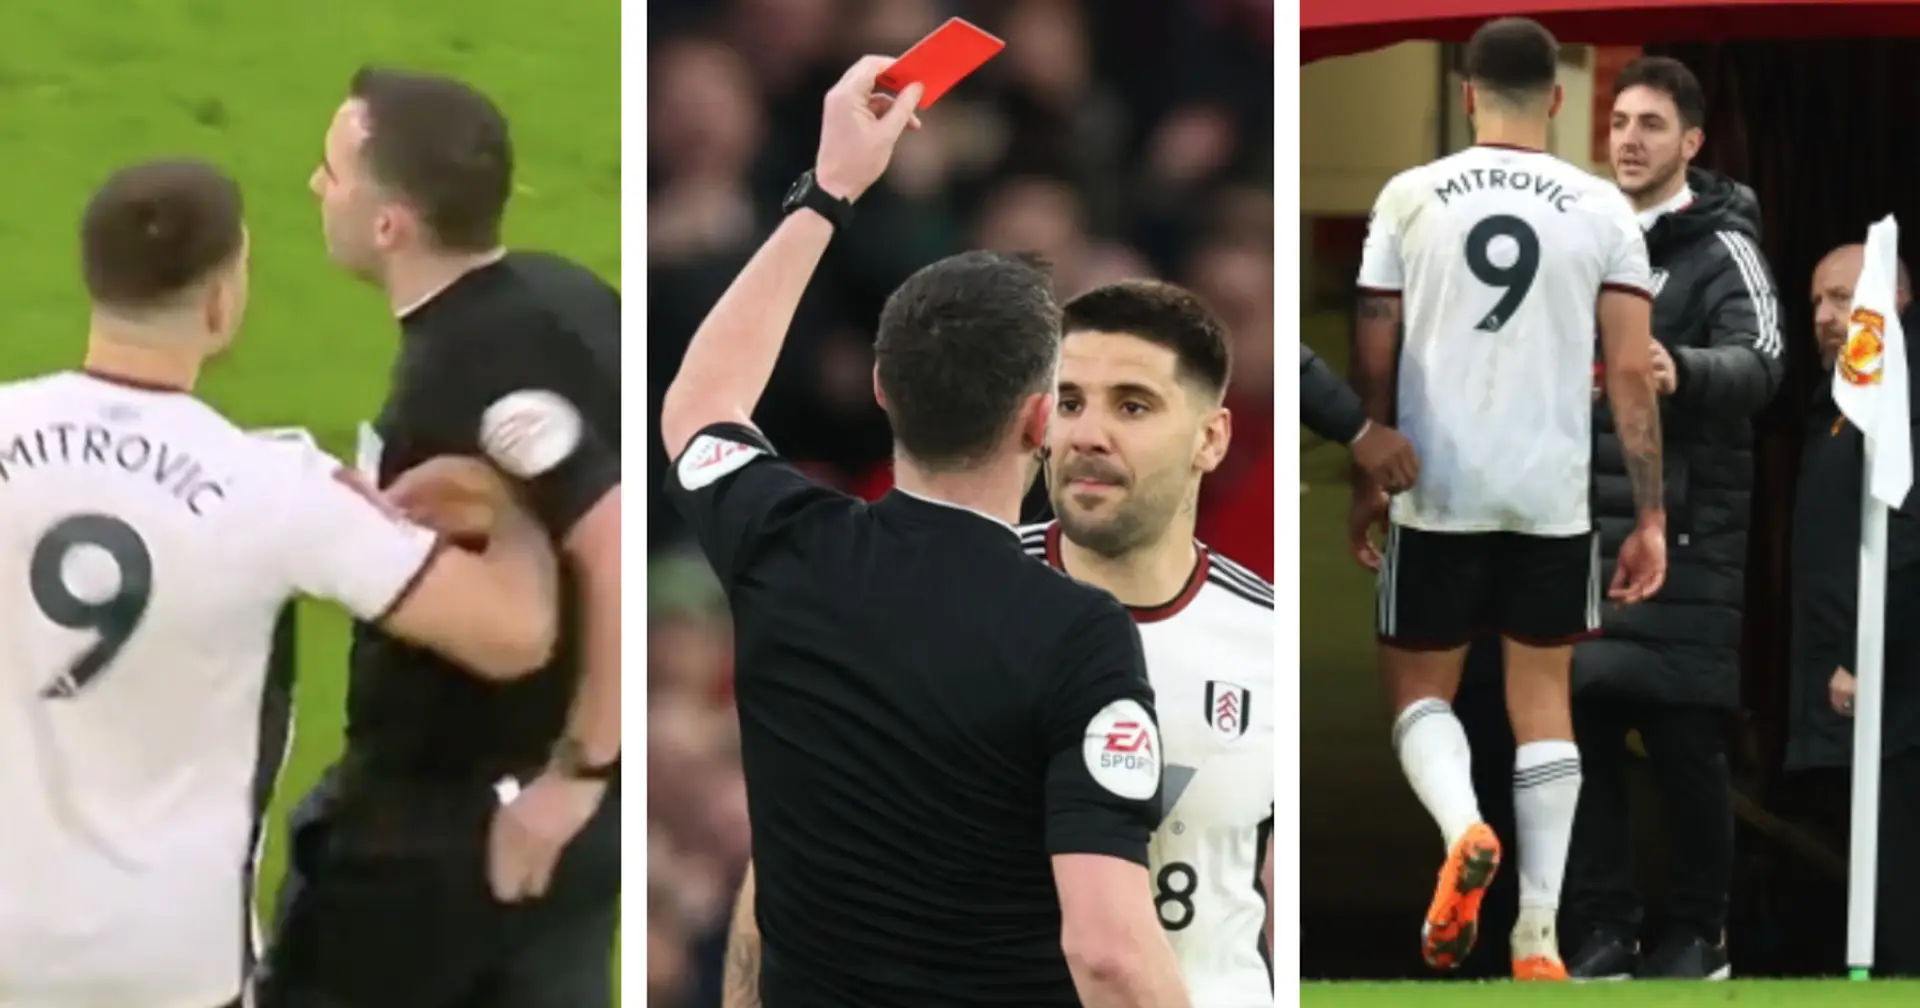 'He's lost his side the game': Aleksandar Mitrovic savaged for moment of madness vs Man United